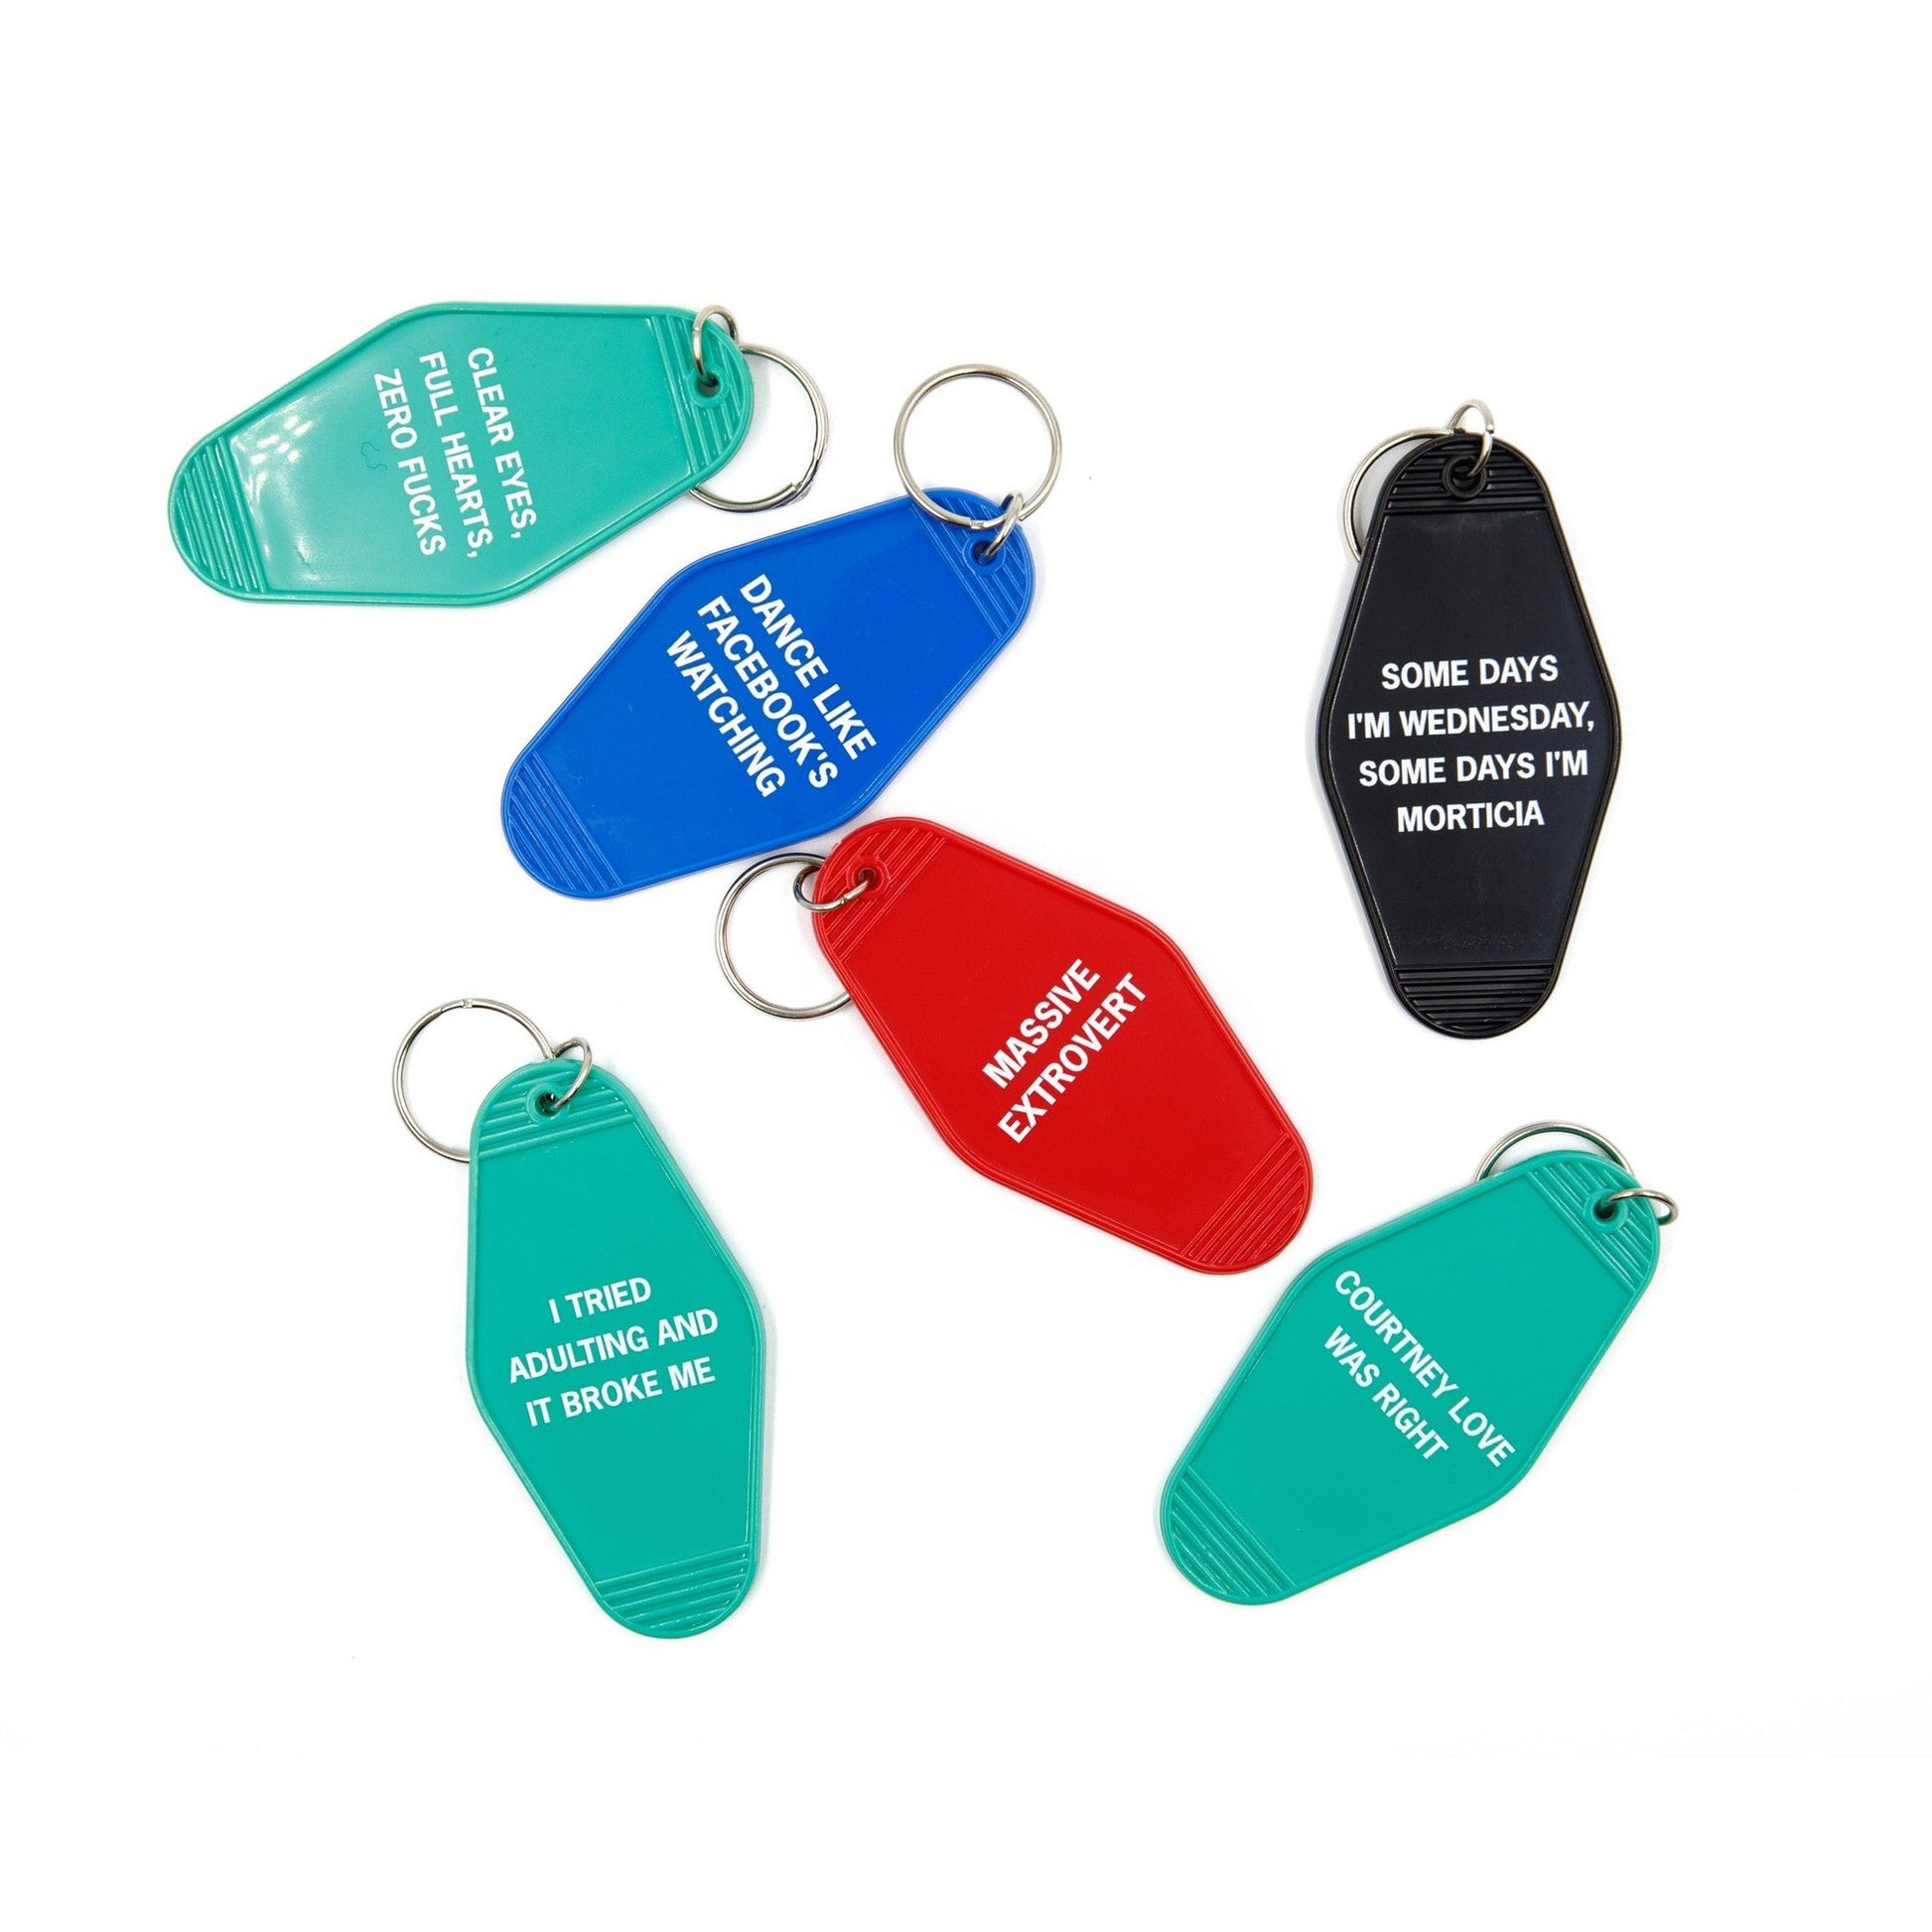 Massive Extrovert Motel Style Keychain In Red